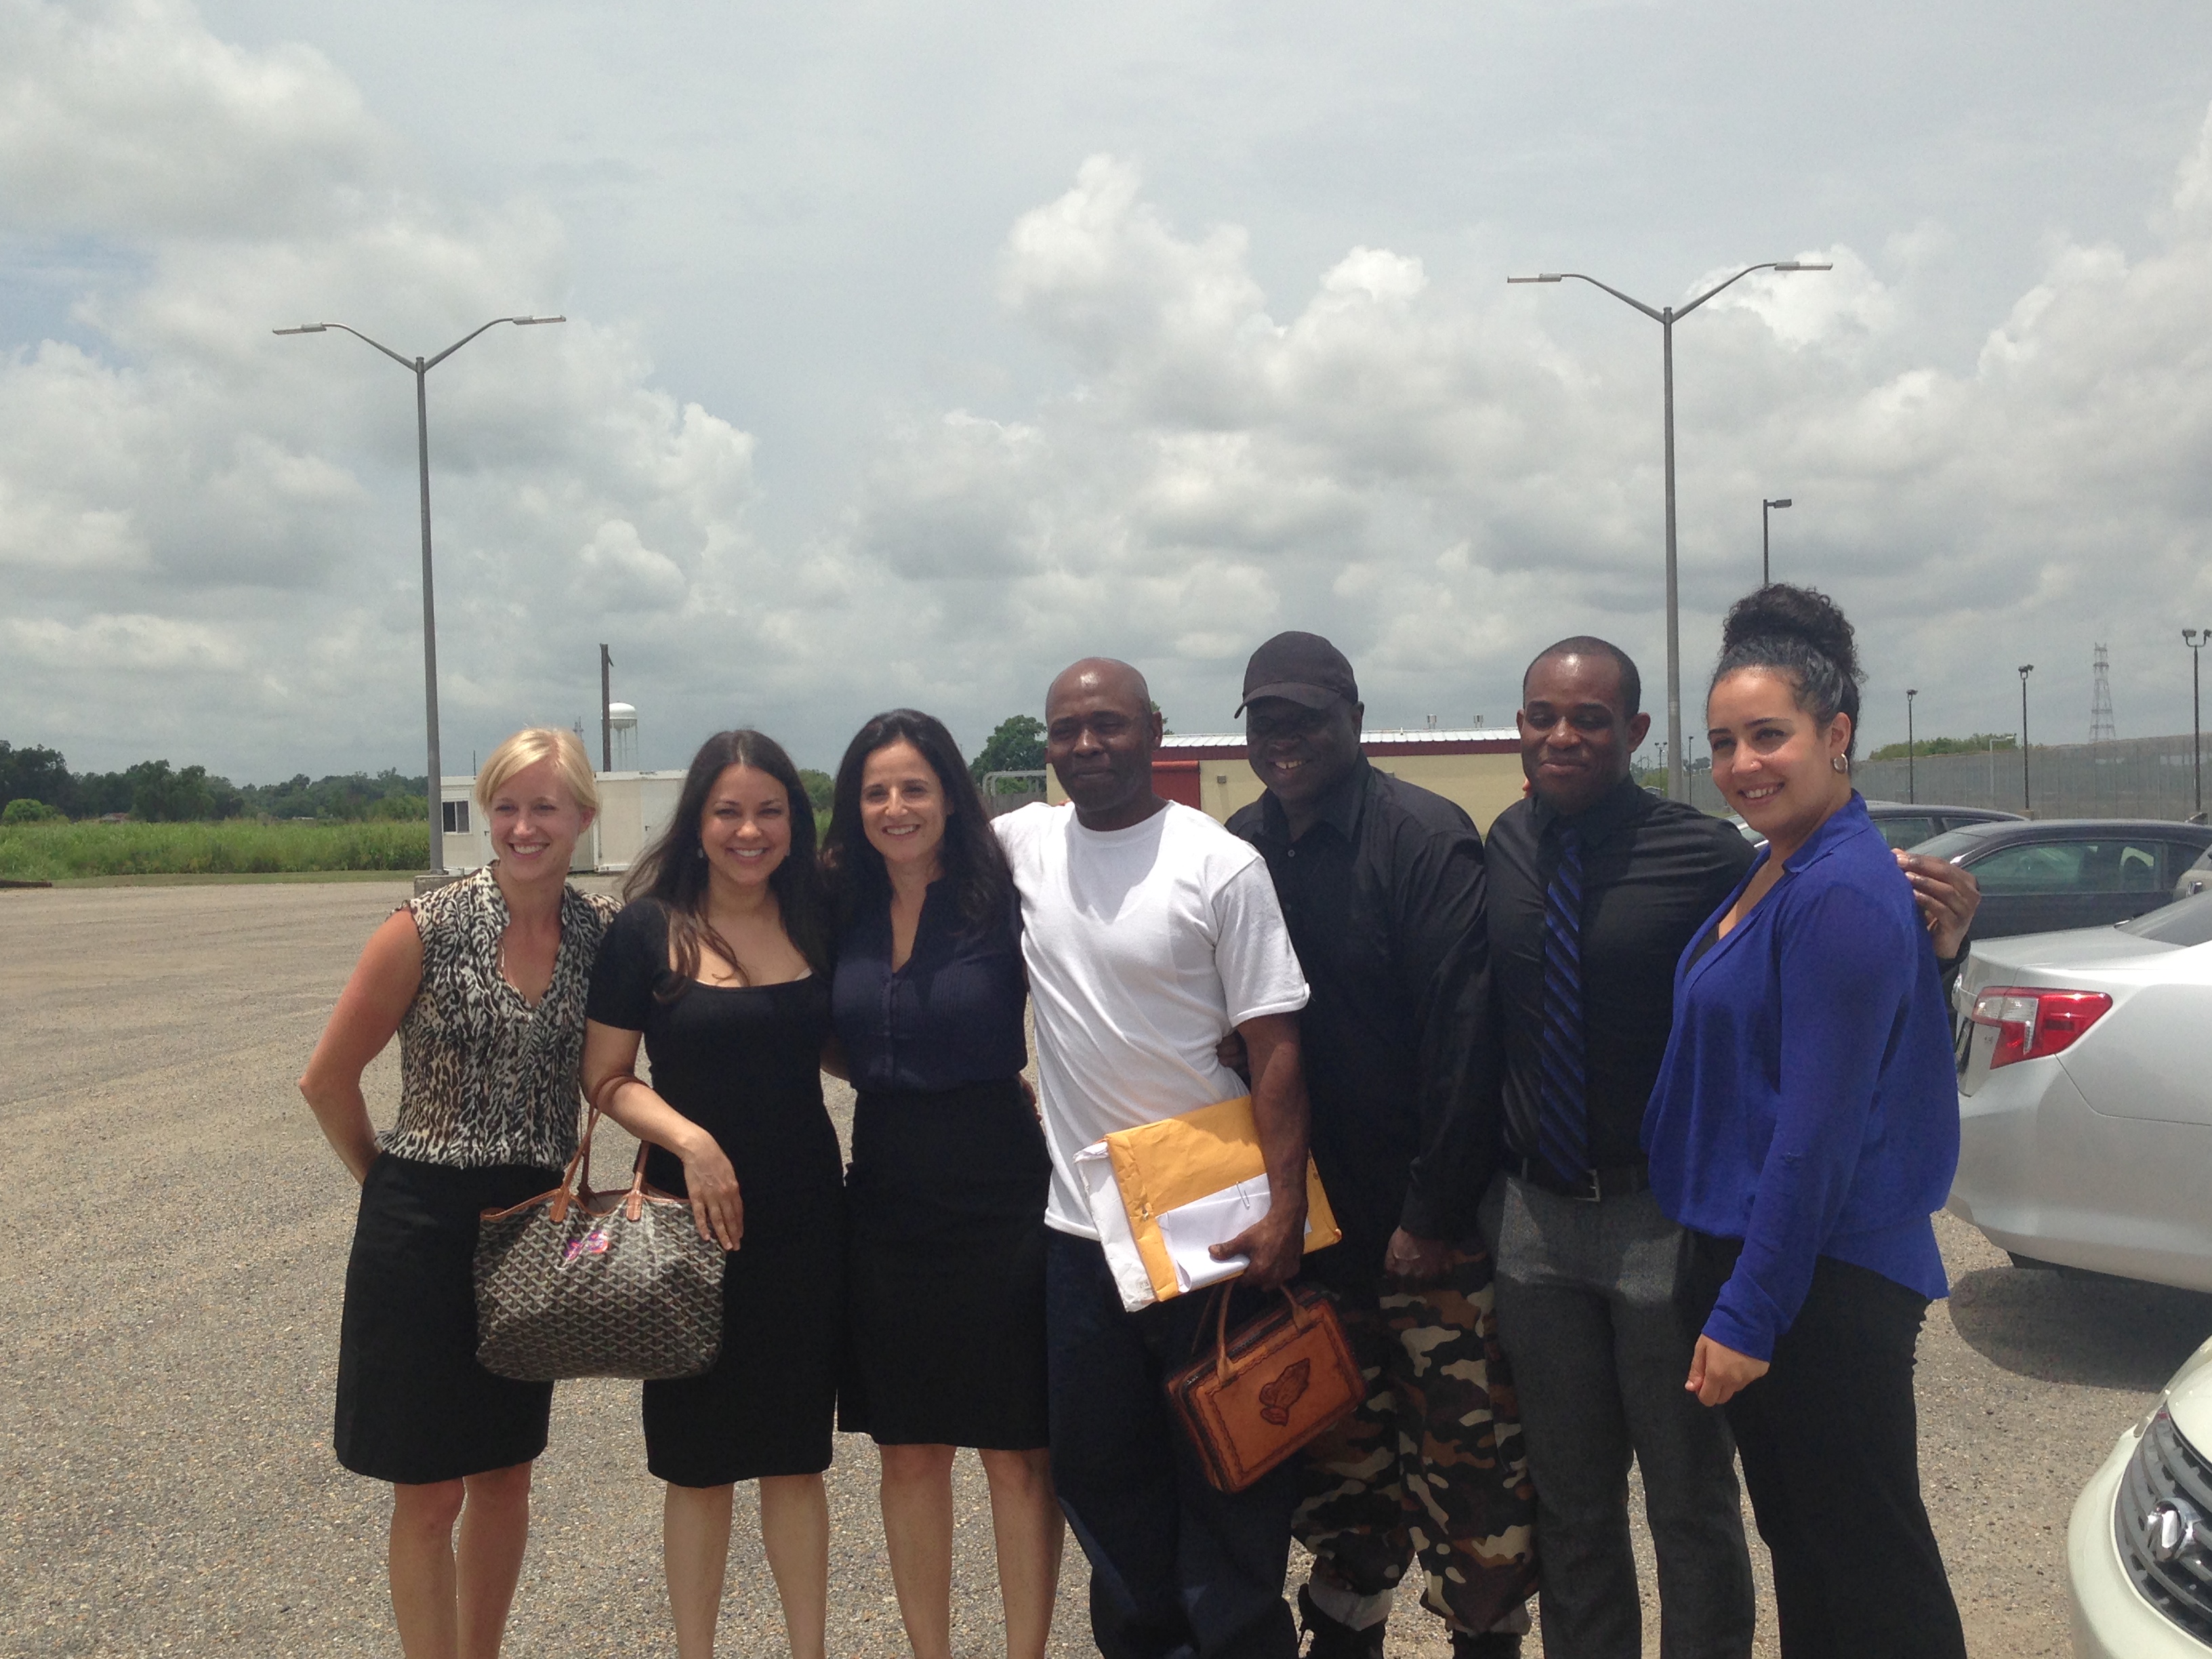 Nathan Brown smiling with attorneys and other members of his welcome party immediately after his release